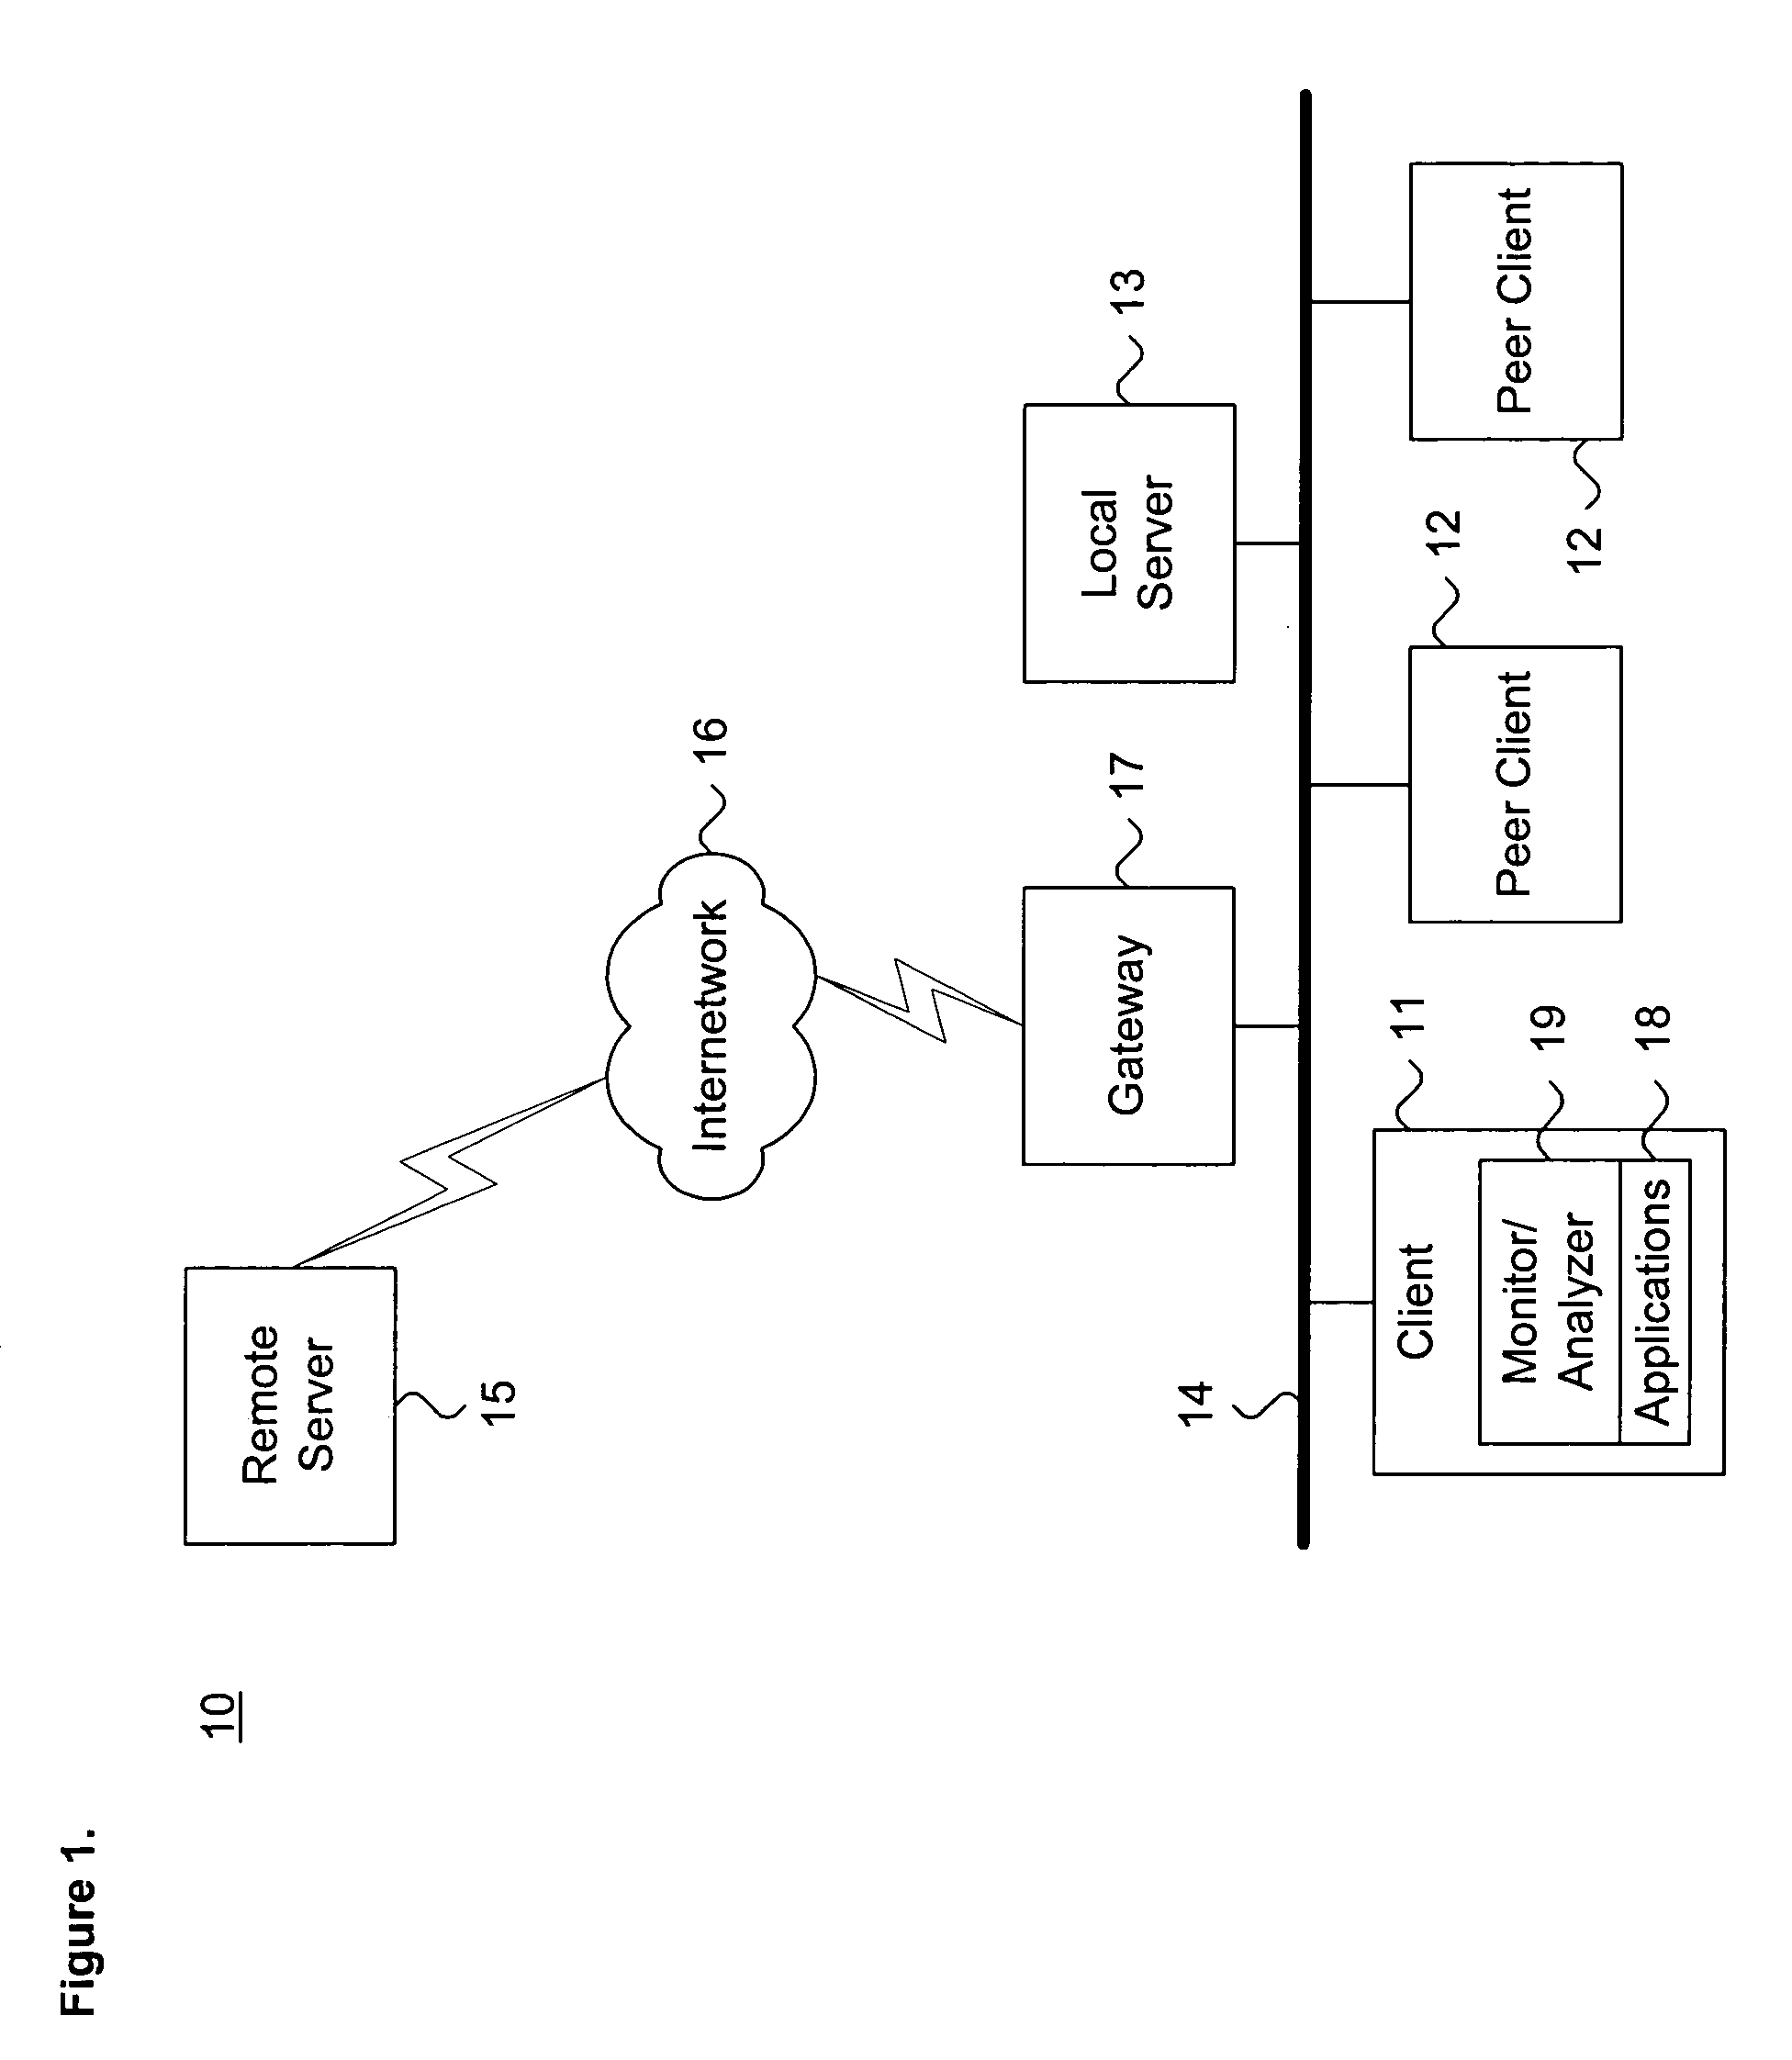 System and method for dynamically detecting computer viruses through associative behavioral analysis of runtime state